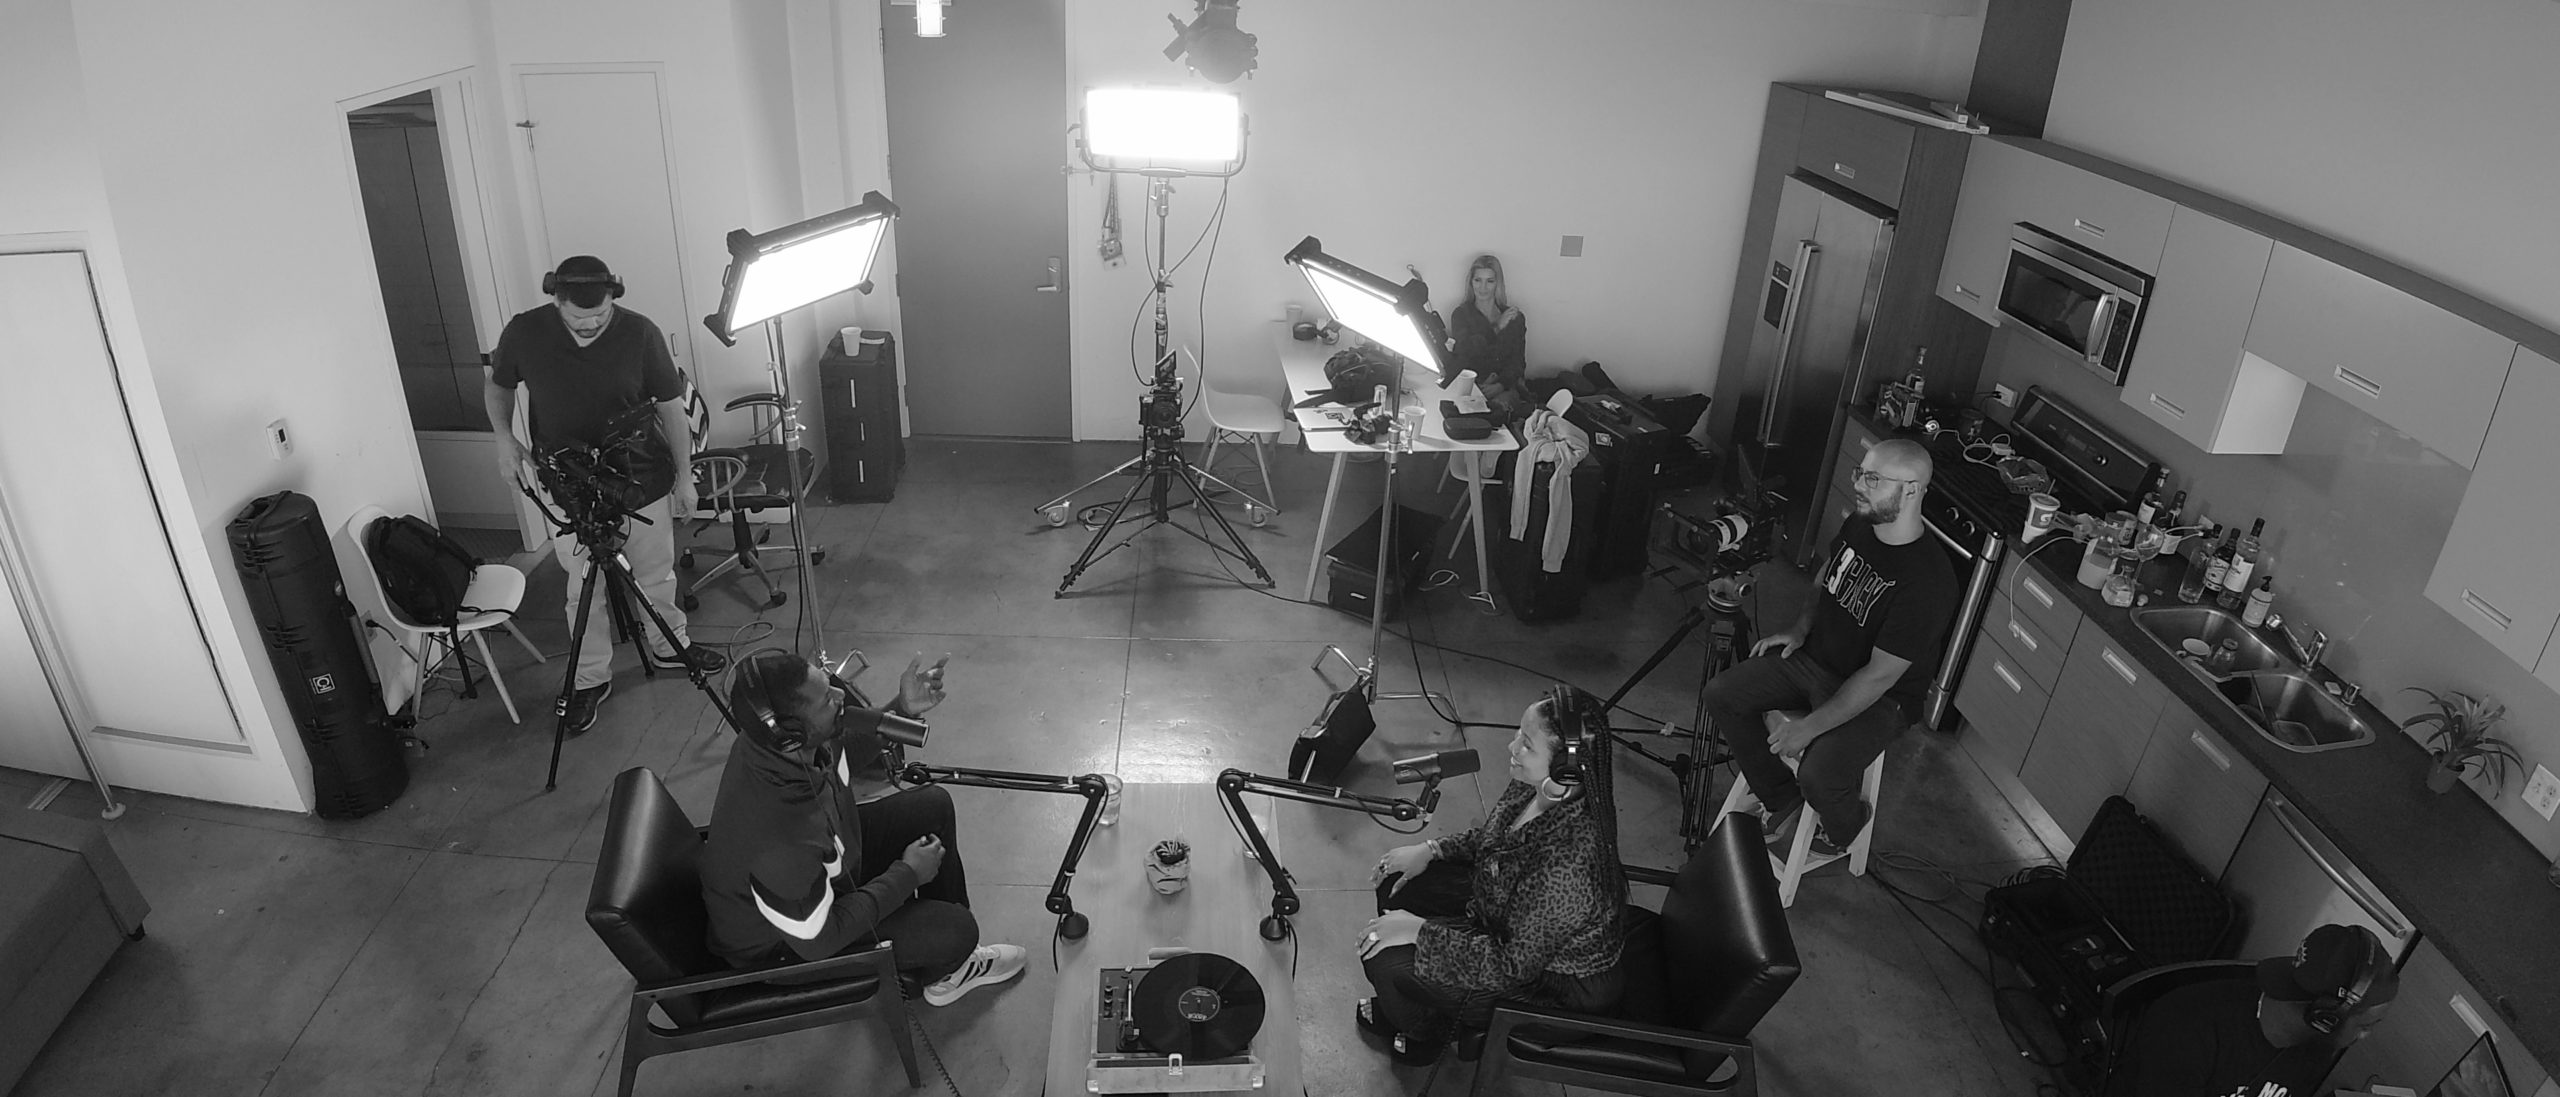 Black and white still of a radio show in progress with five people in the room